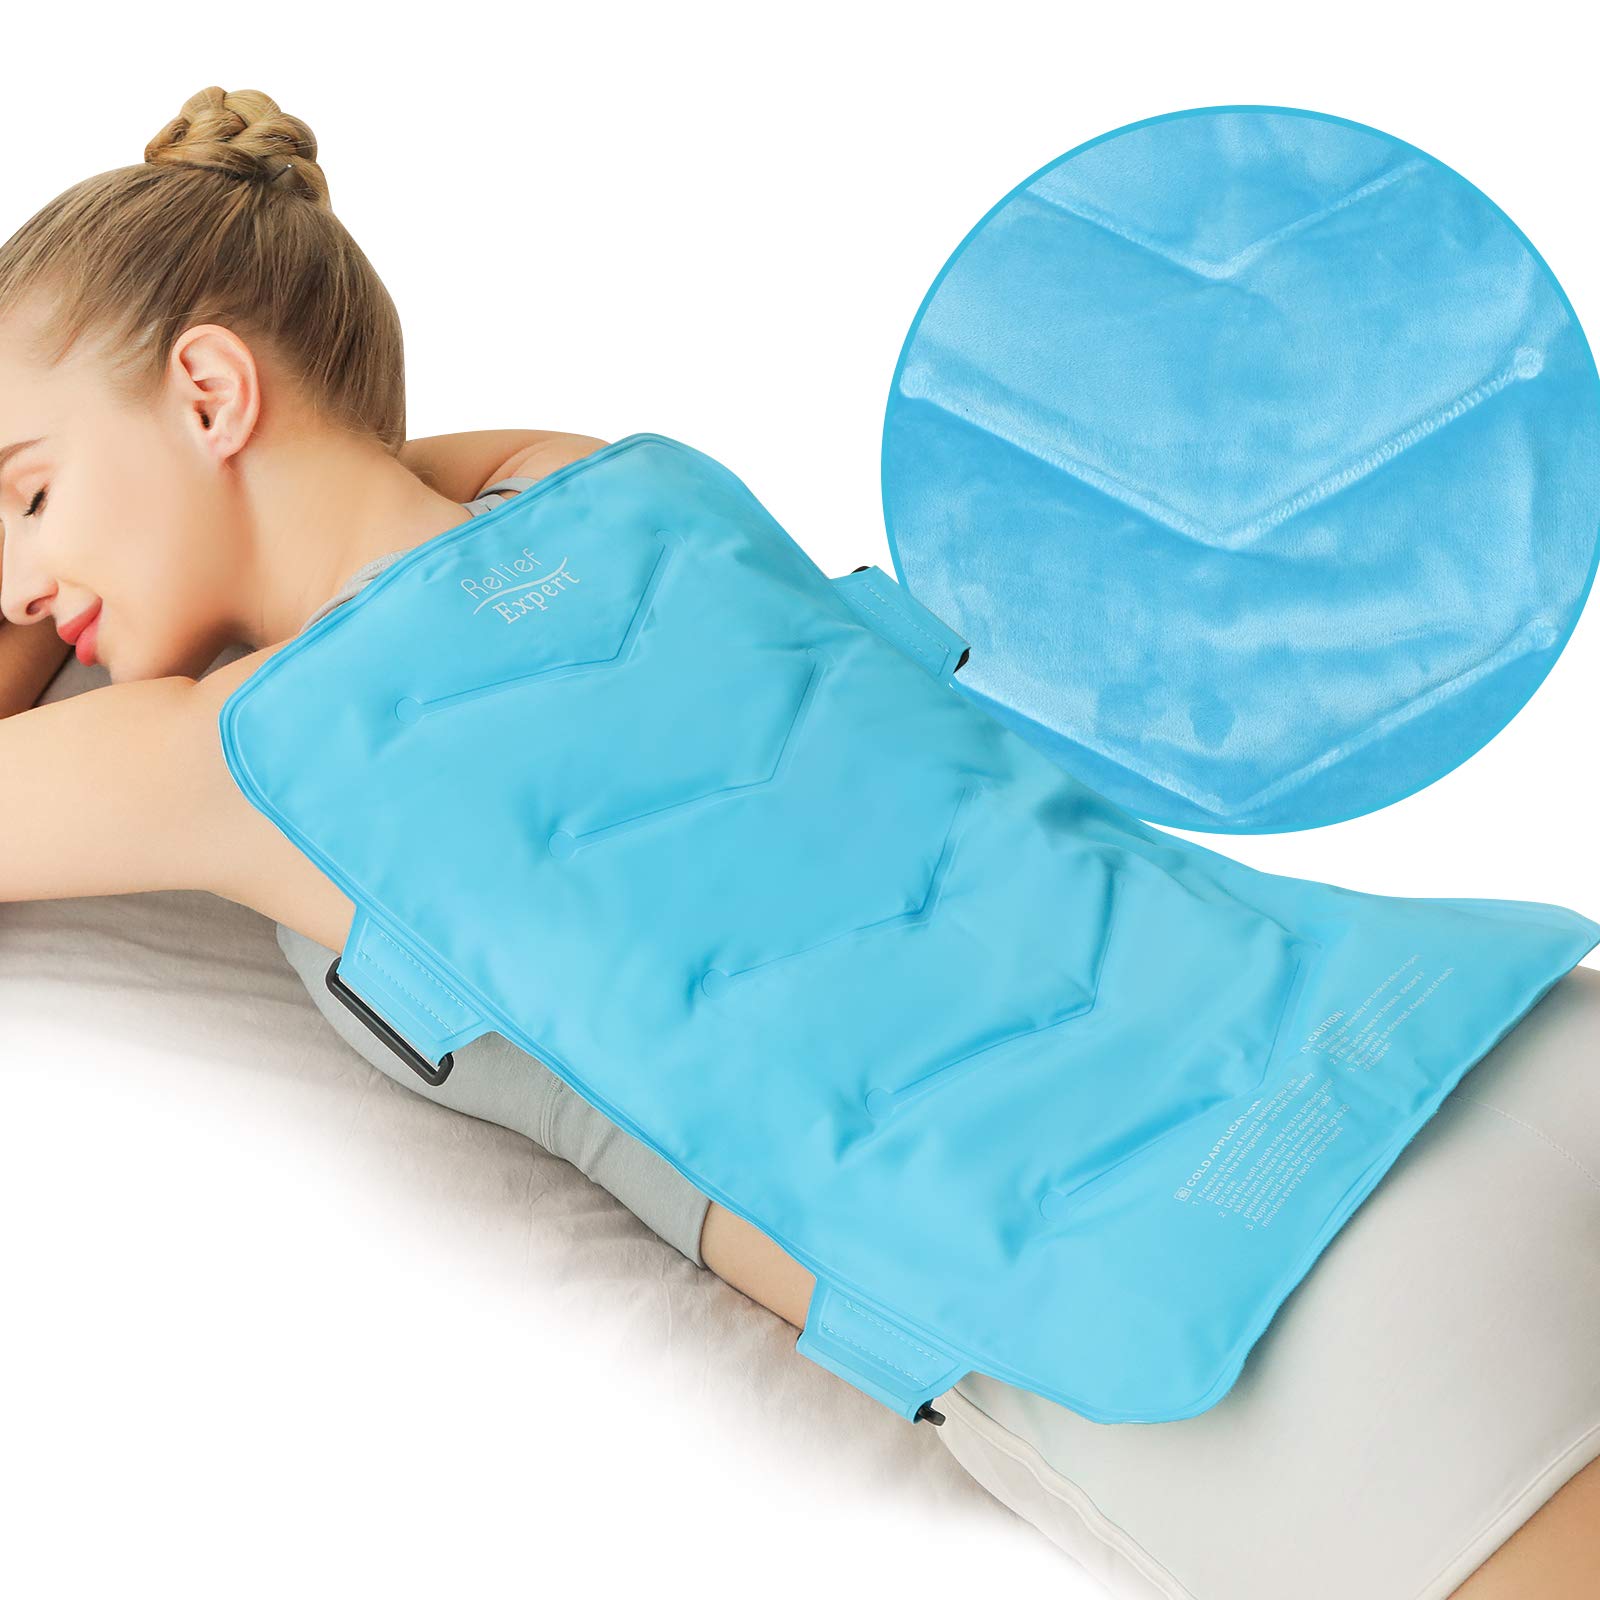 Relief Expert Extra Large Back Ice Pack (13”x21”) - Reusable Ice